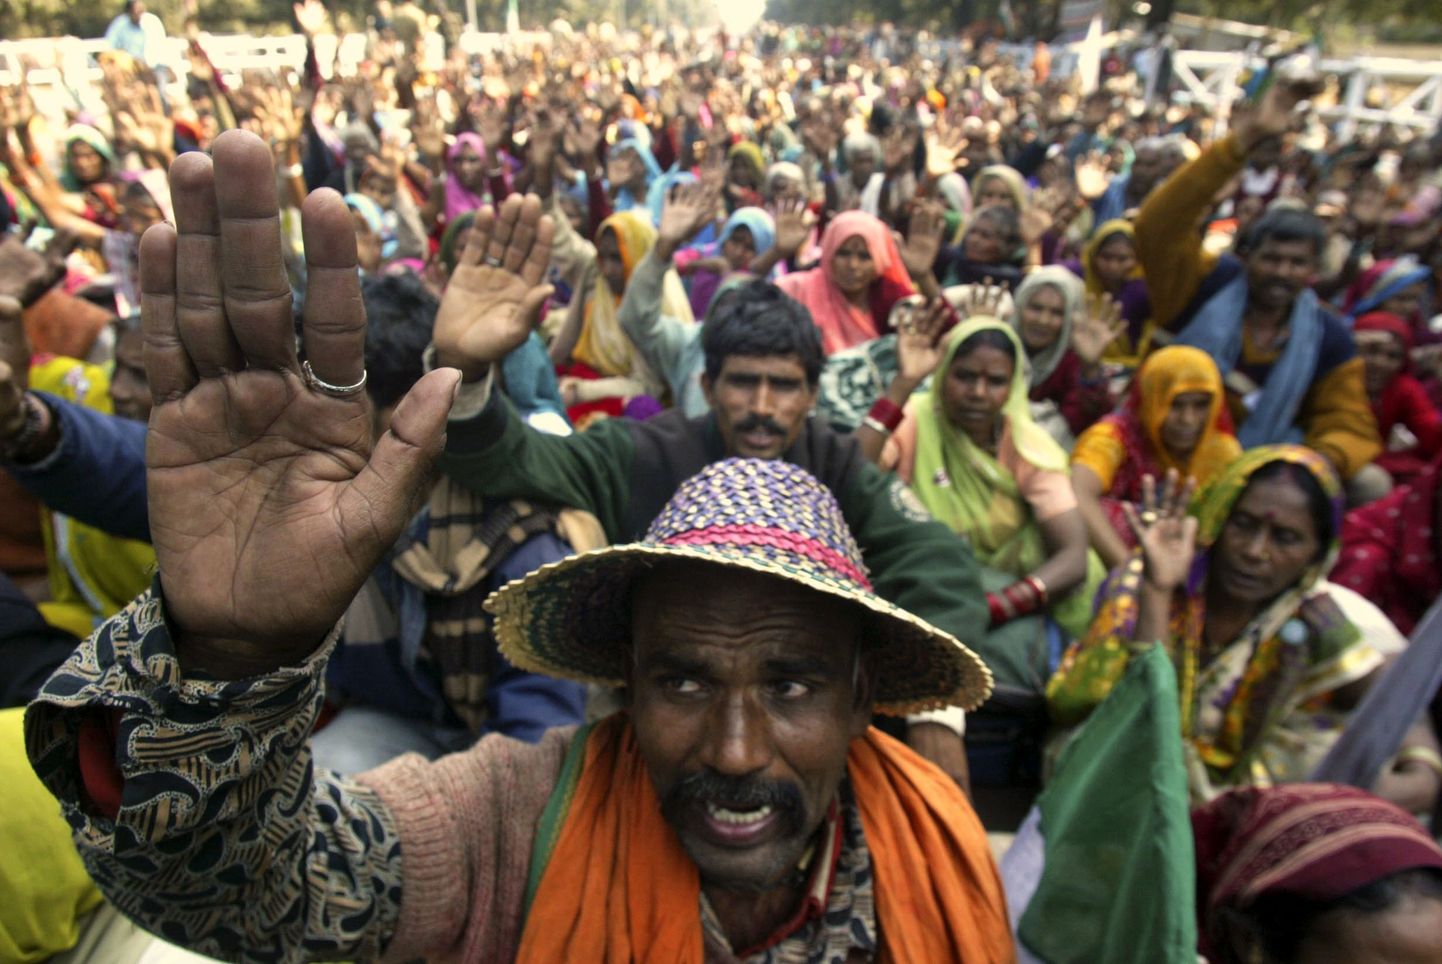 Indian farmers raise their hands as they protest against new industries which they say have been proposed to be built on agricultural land, in Bhubaneswar, India, Monday, Jan. 19, 2009. (AP Photo / Biswaranjan Rout) / SCANPIX Code: 436